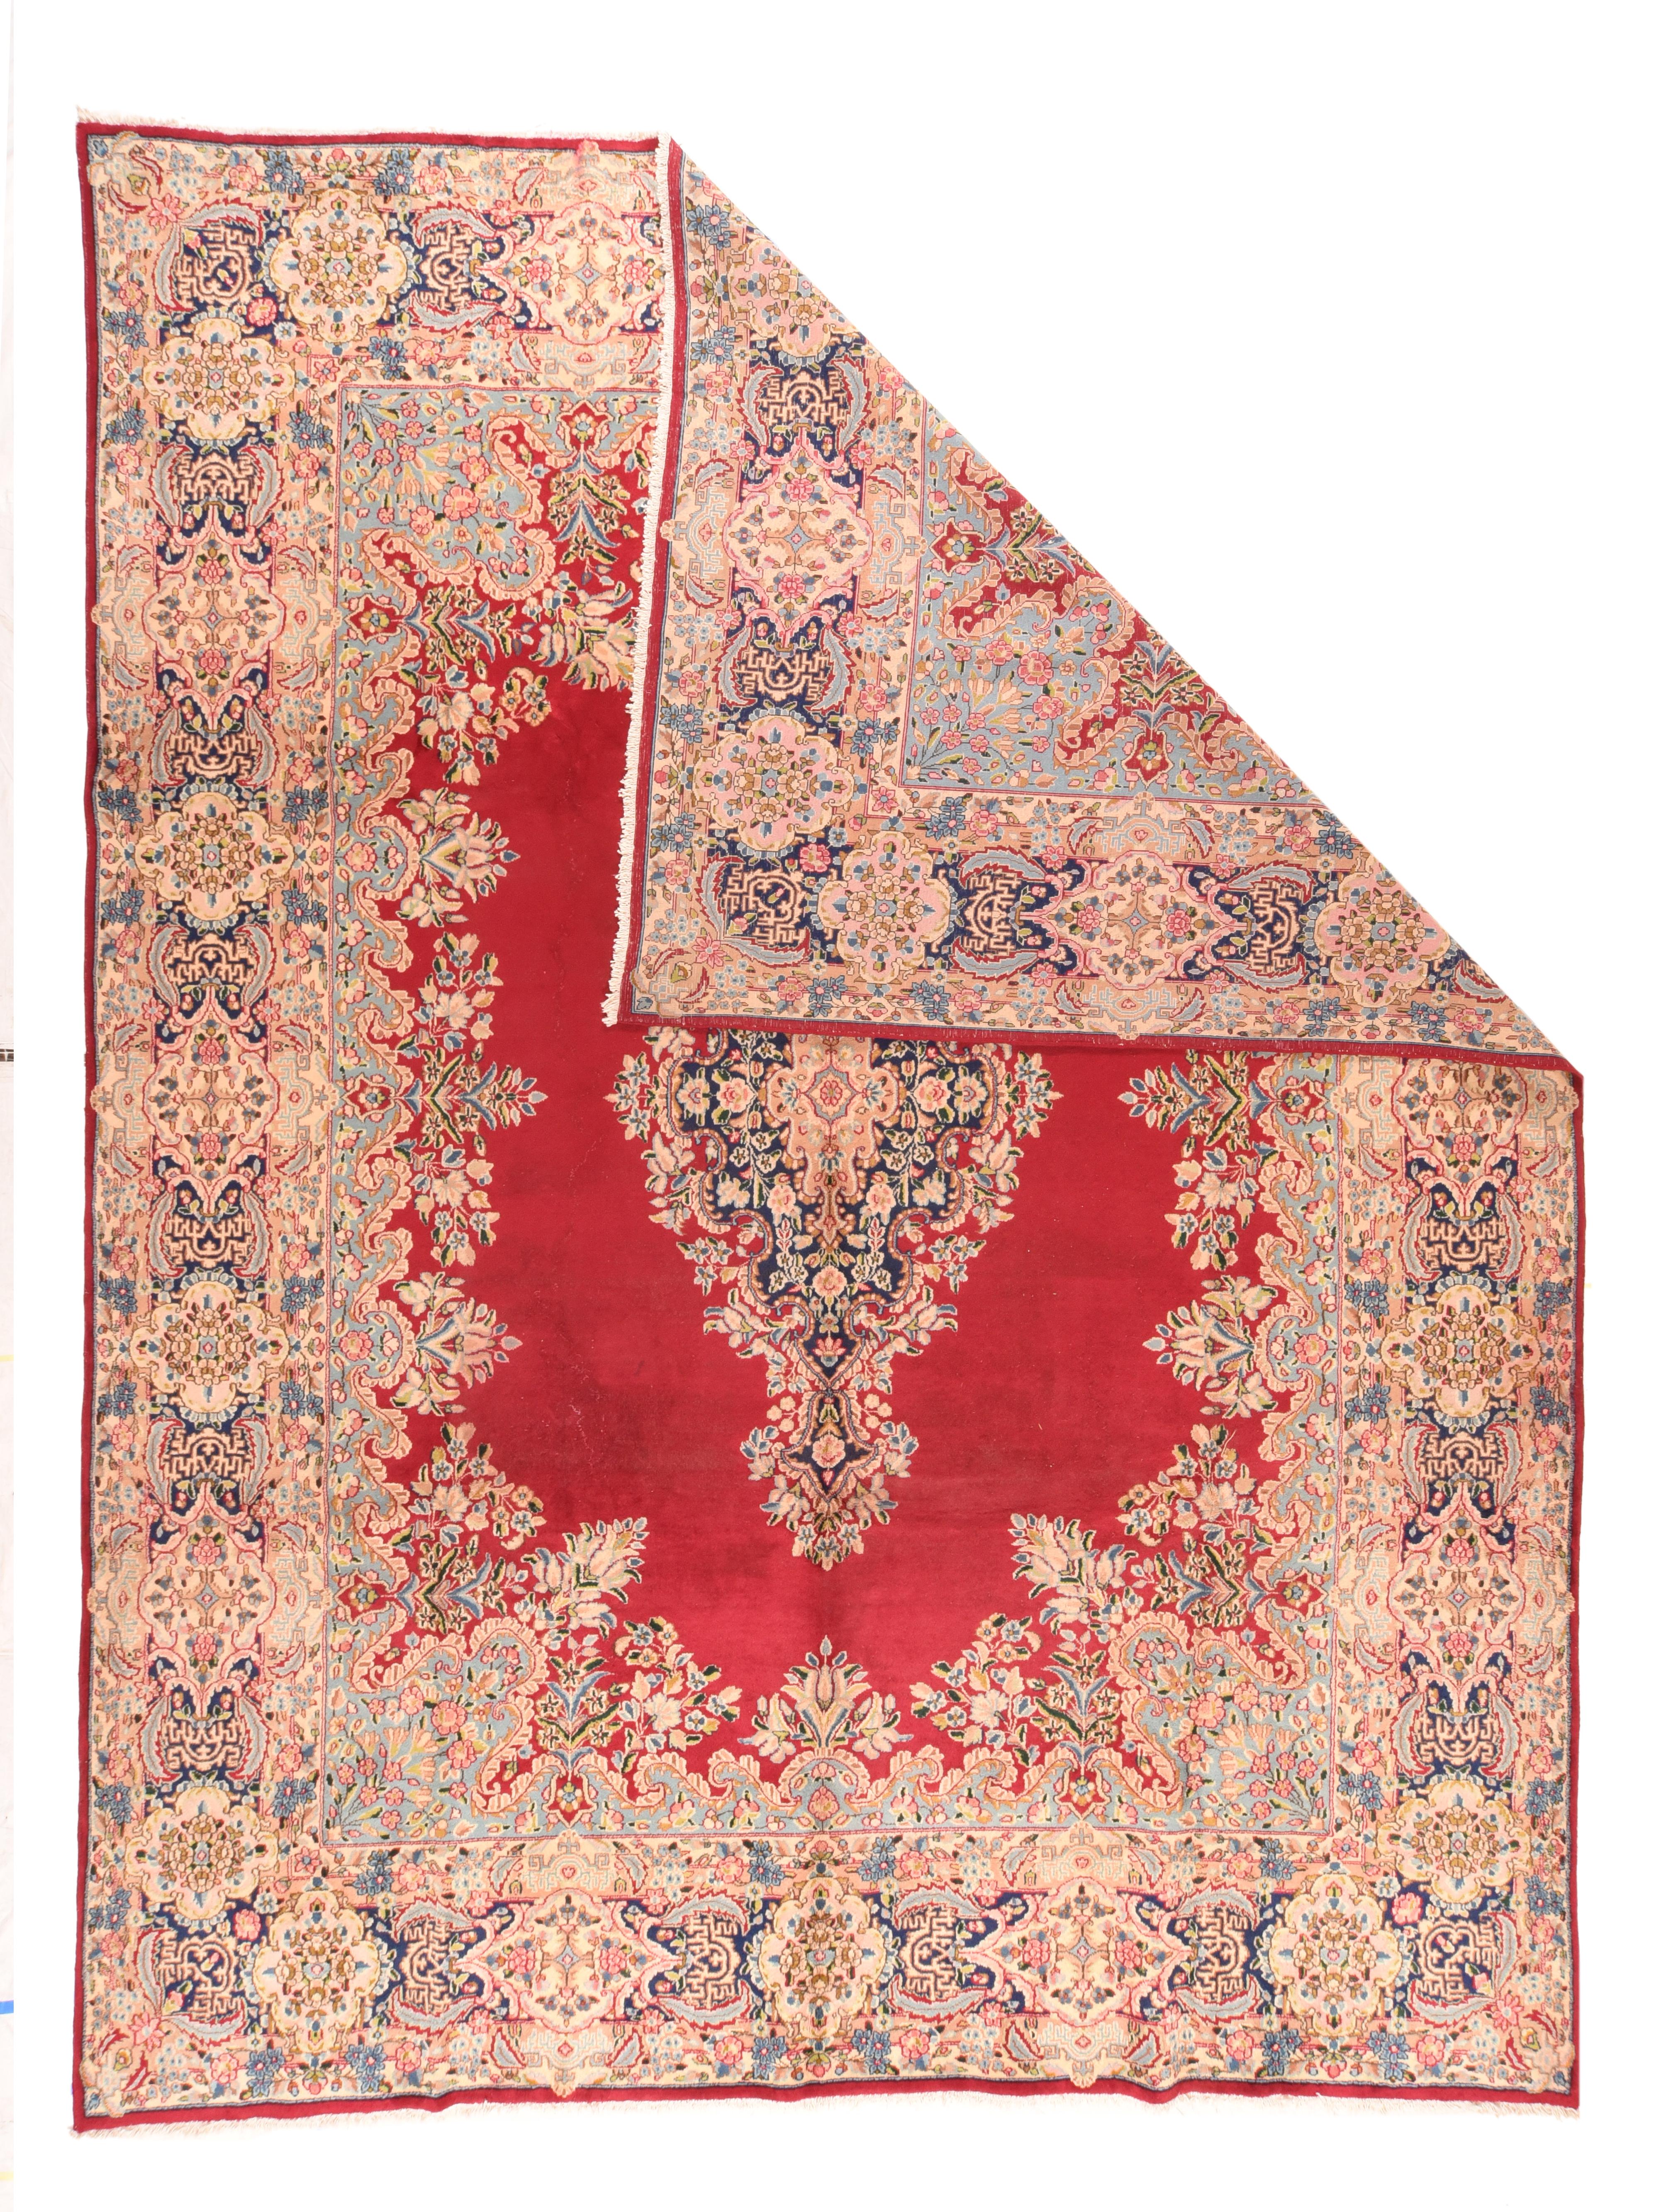 The crimson open field is edged and encroached by a lacy floral surround, while the vertically elongated  near black pendanted medallion floats freely. Royal blue border with cartouches and  octofoils. Wide palette including: sand, straw, pistachio,